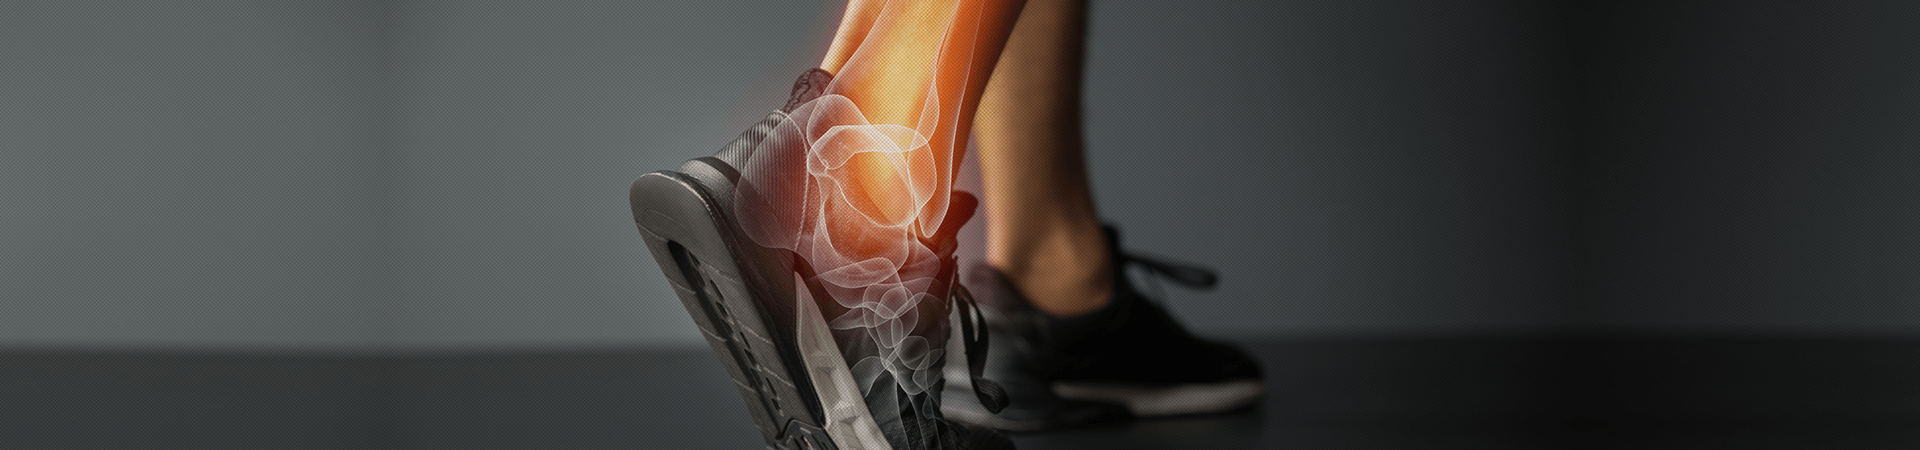 Foot and Ankle Tendinitis